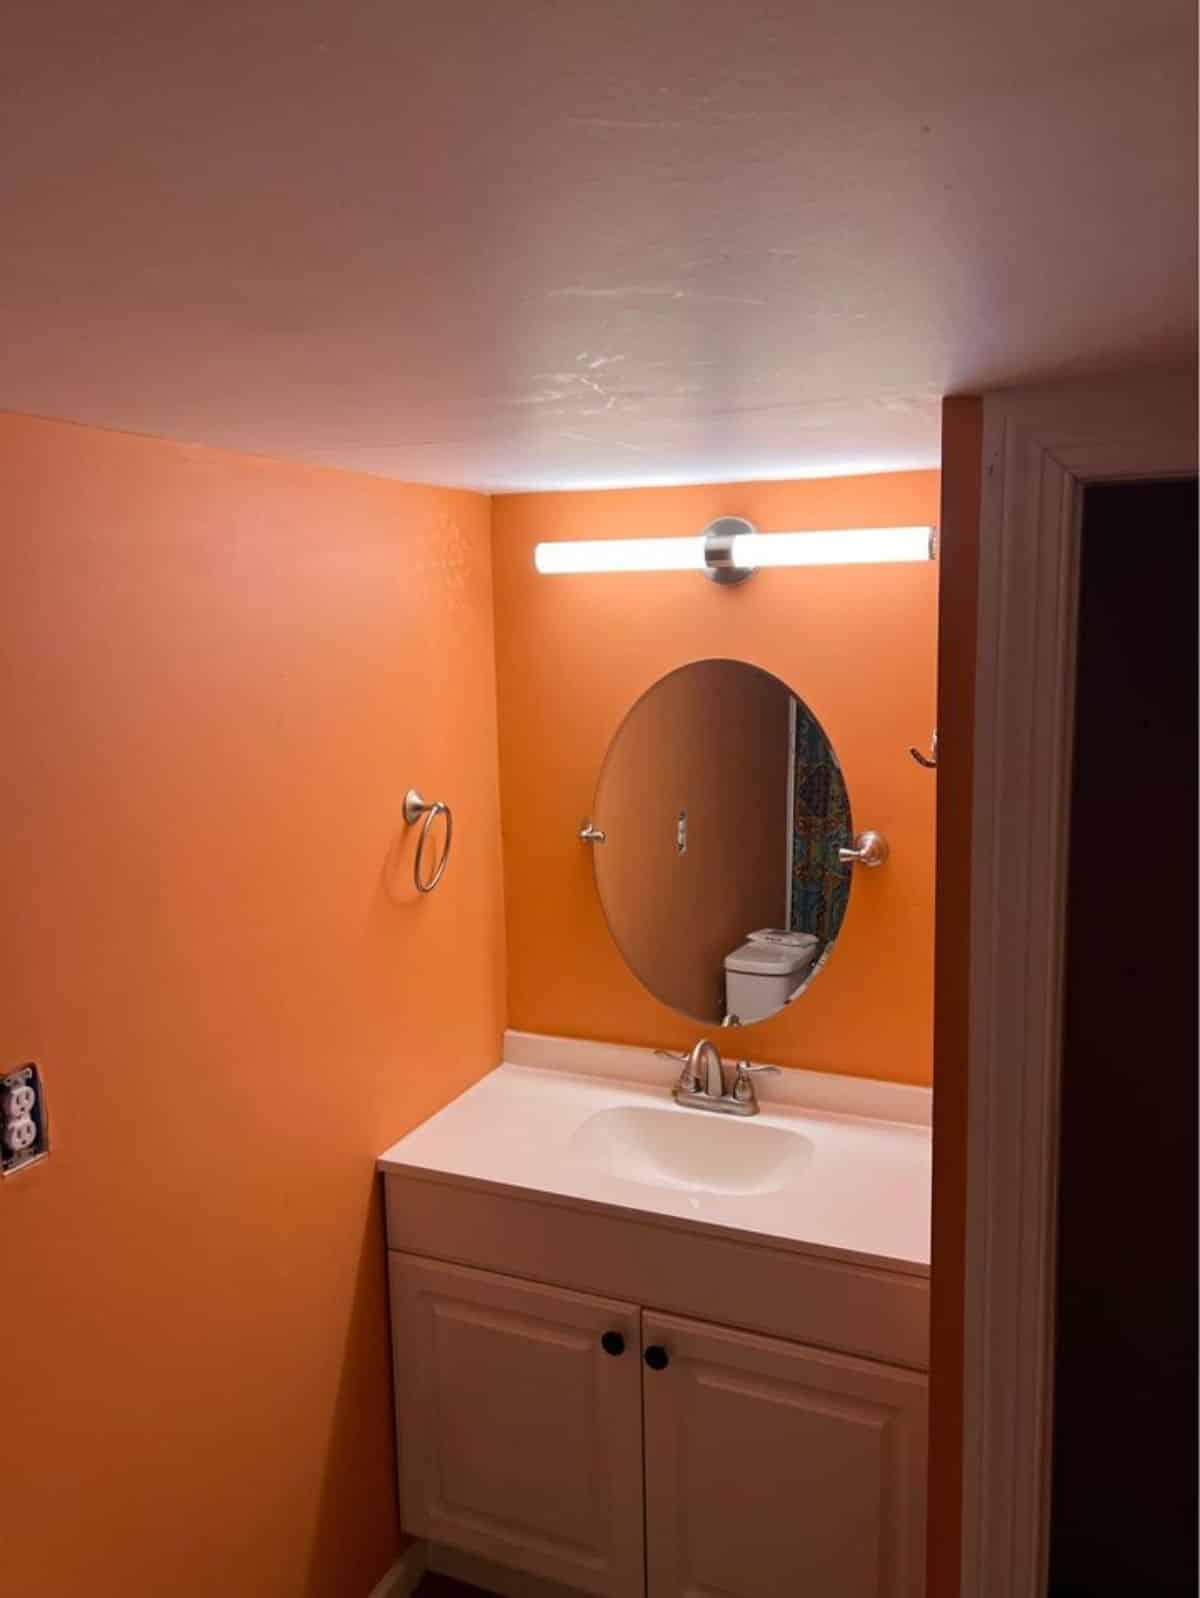 Sink with vanity and mirror in bathroom